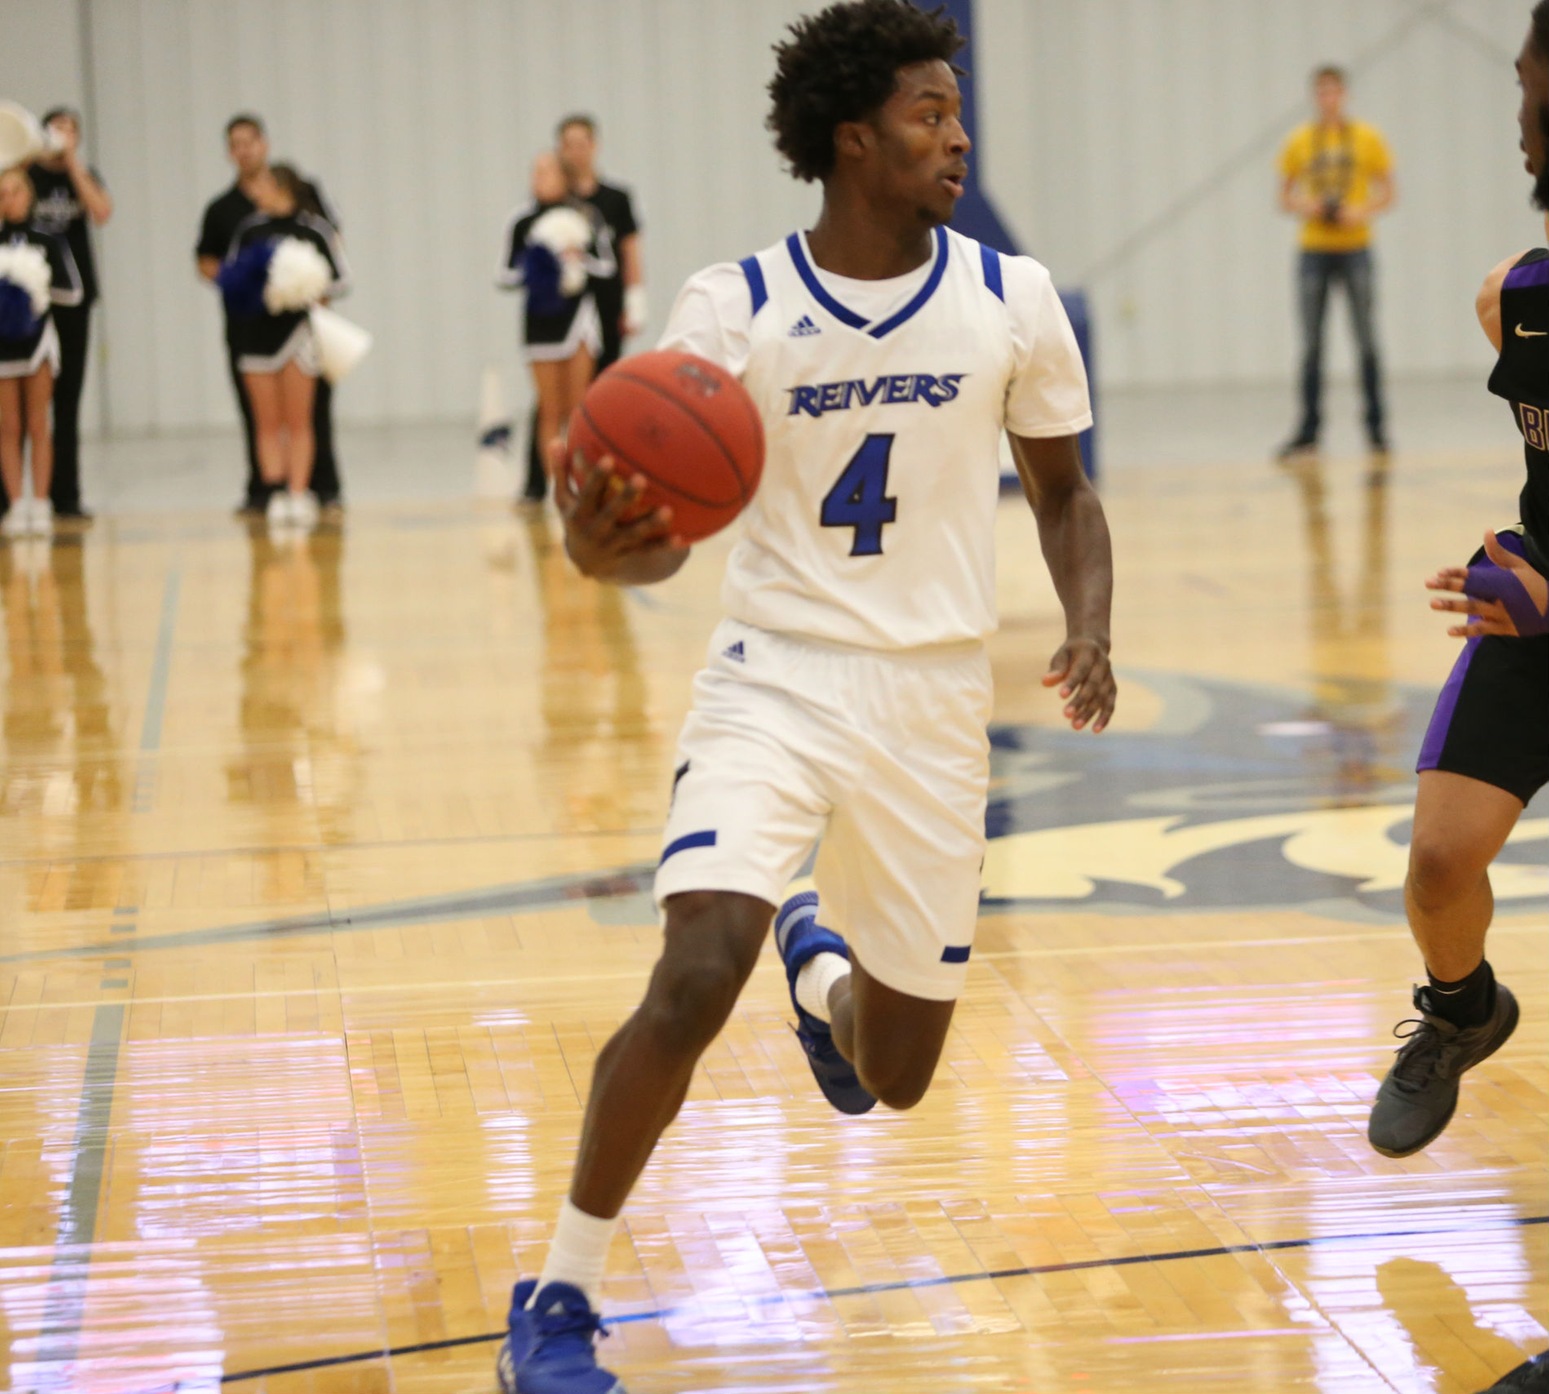 In a game with 19 lead changes and 8 ties, Caleb Huffman and his Reiver teammates came up one lead change short Saturday (11/23) night to Barton (KS).